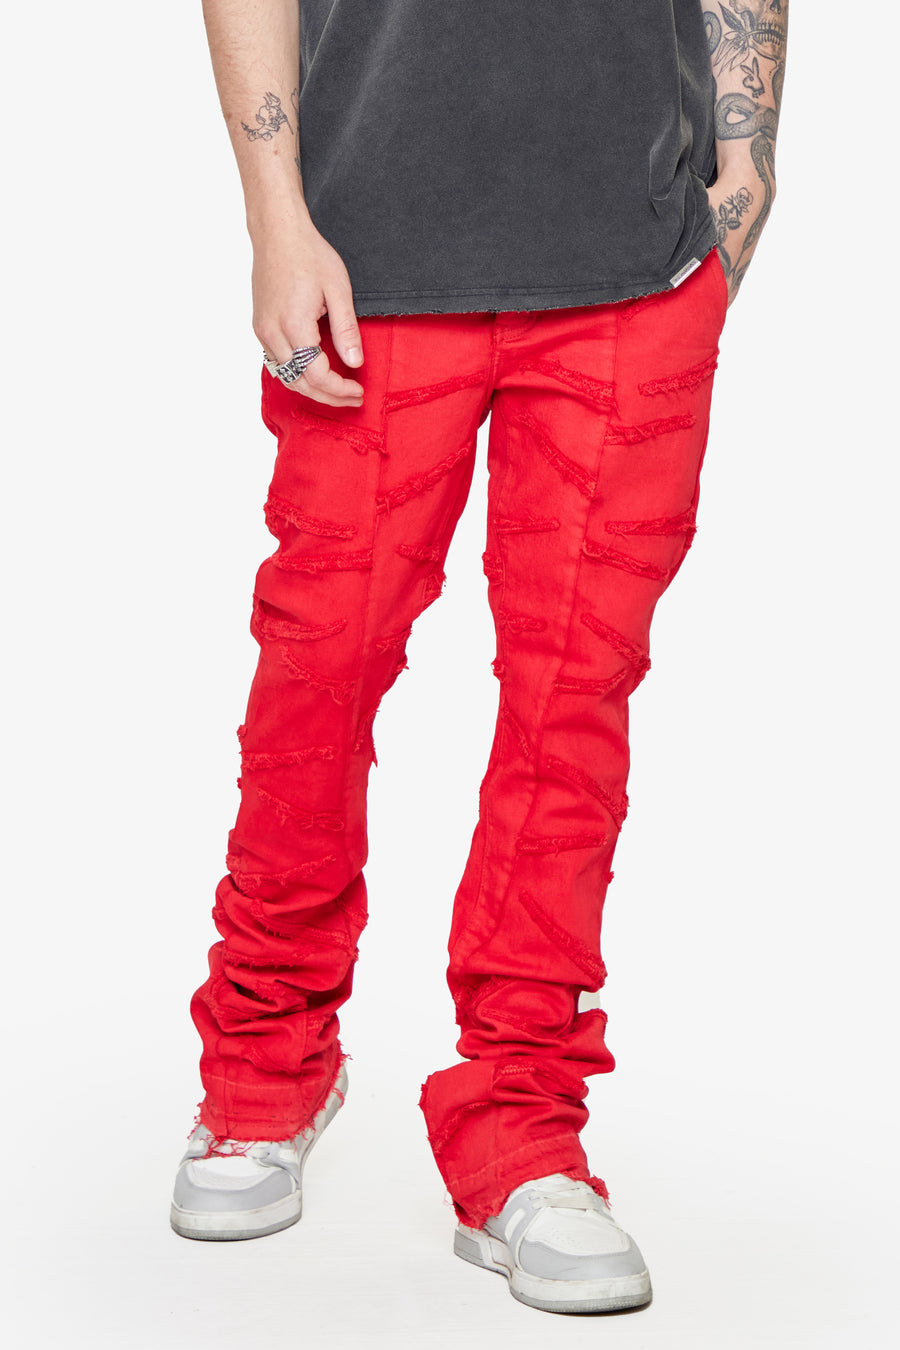 ‚ÄúSABER‚Äù RED WASHED STACKED FLARE JEAN